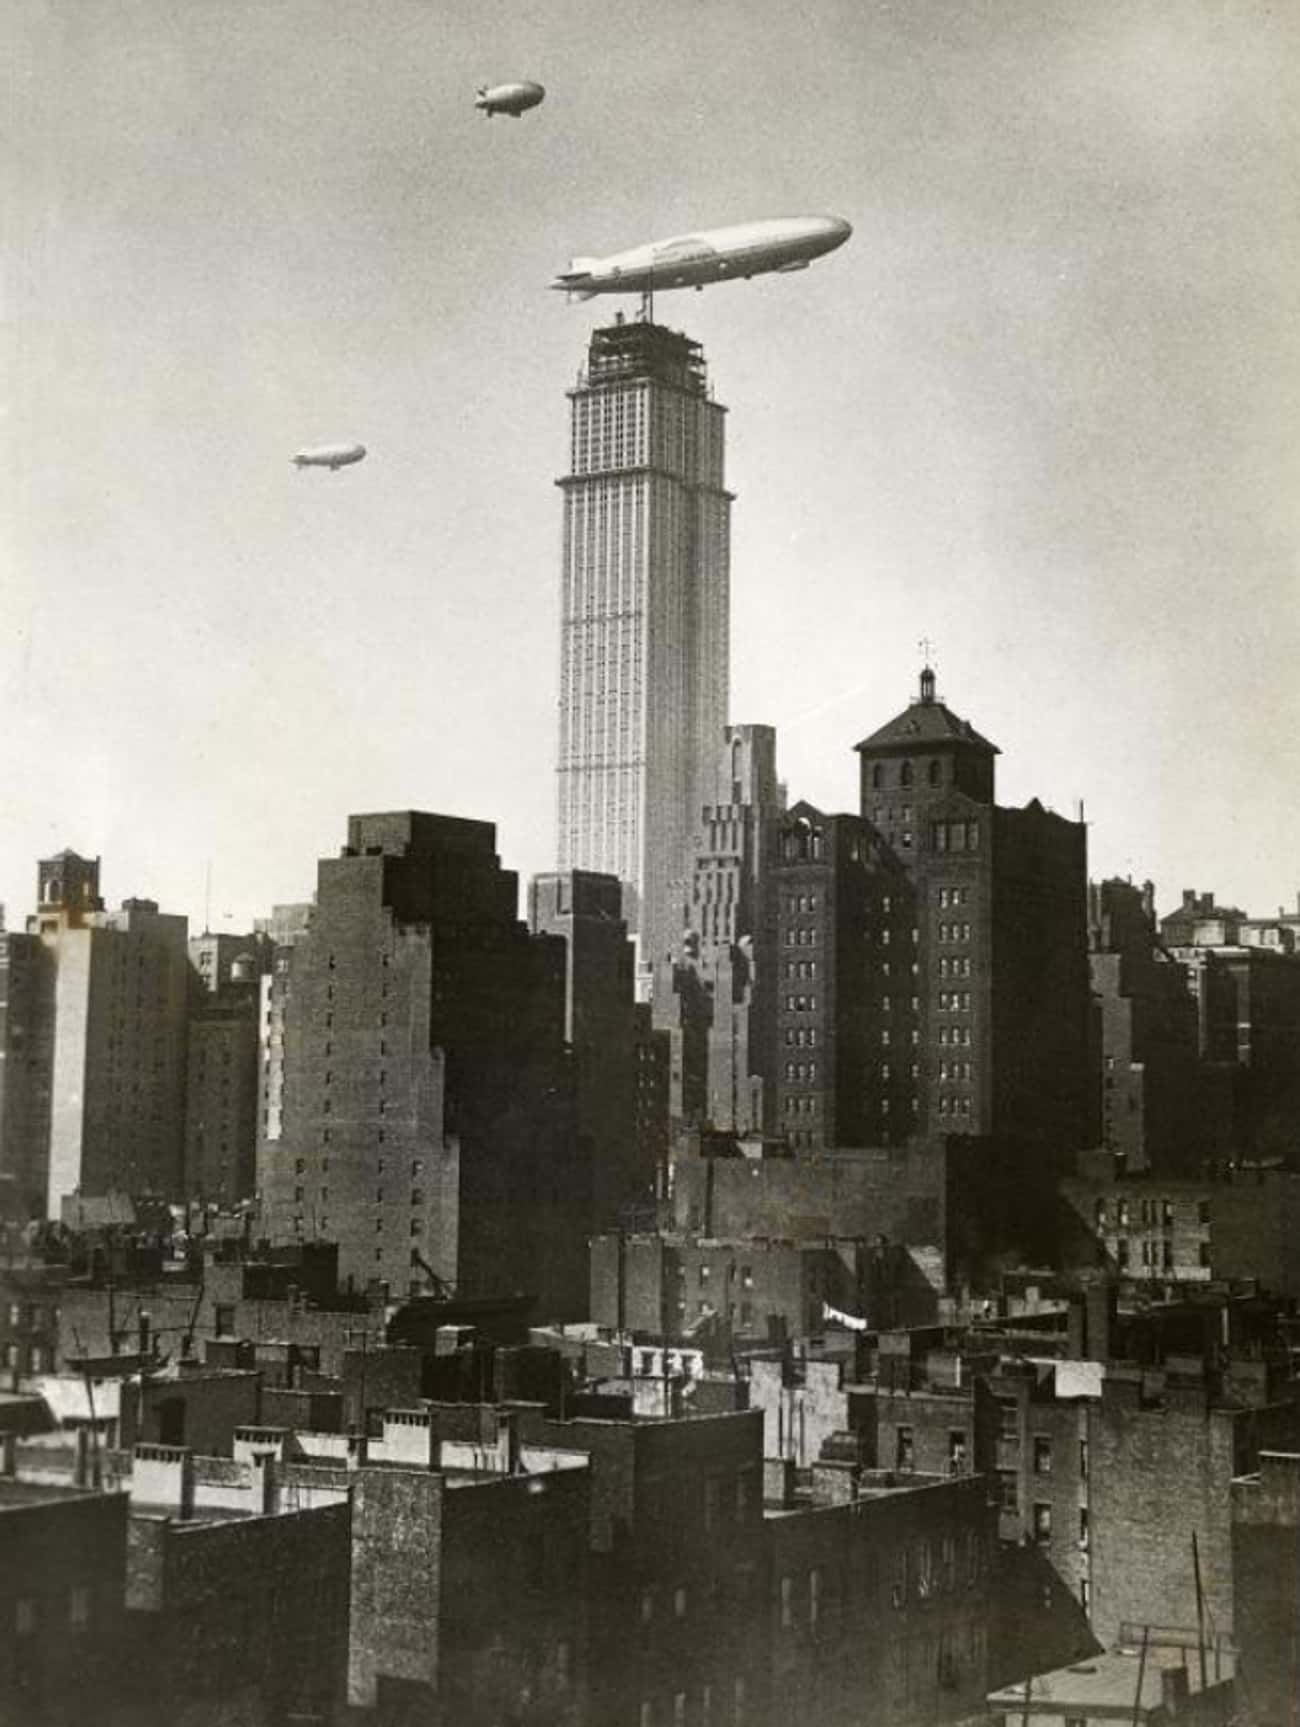 Zeppelin Over An In-Construction Empire State Building